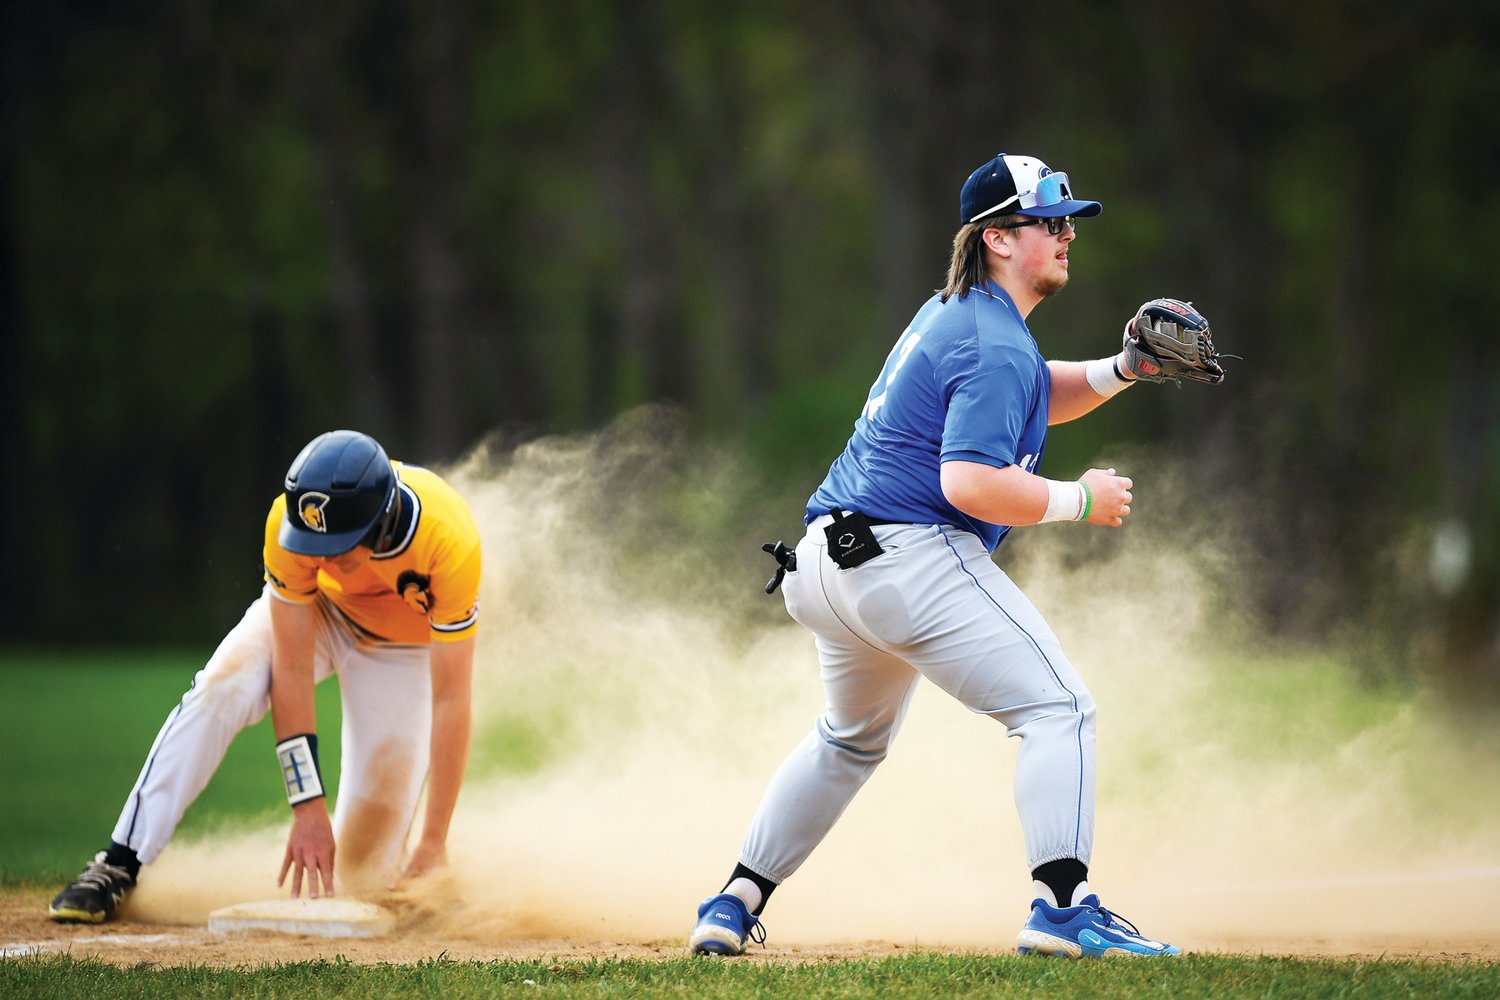 Quakertown third baseman Carl Weiss fields the throw as Wissahickon’s Jack O’Donnell slides into base.